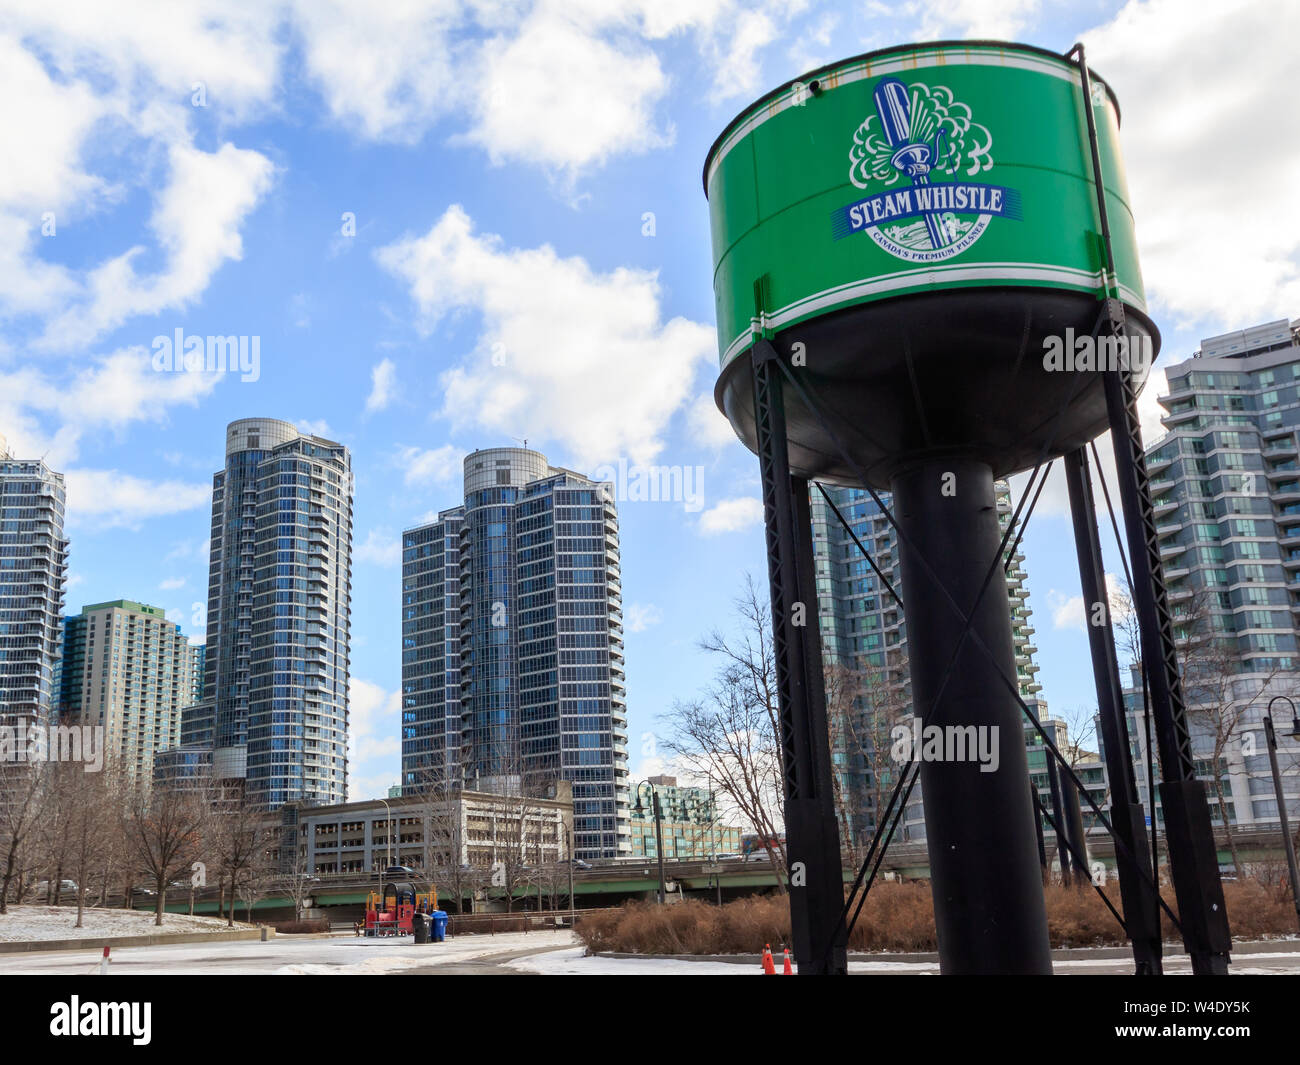 Steam Whistle Brewing tank beside the brewhouse at Roundhouse Park. Stock Photo